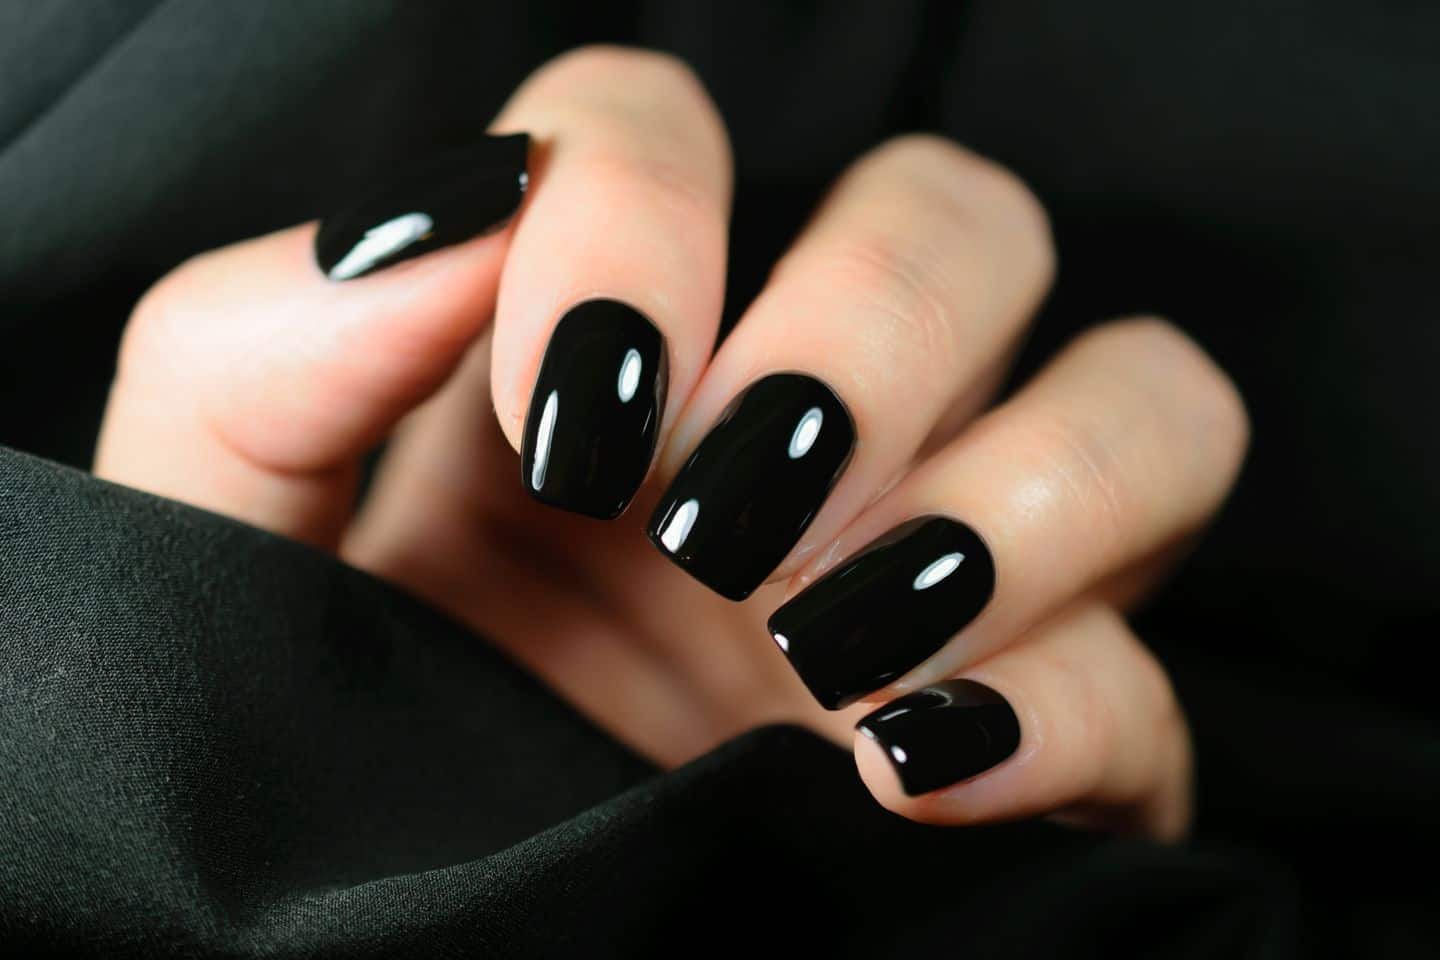 1. Black and White Nail Art Designs on Tumblr - wide 10